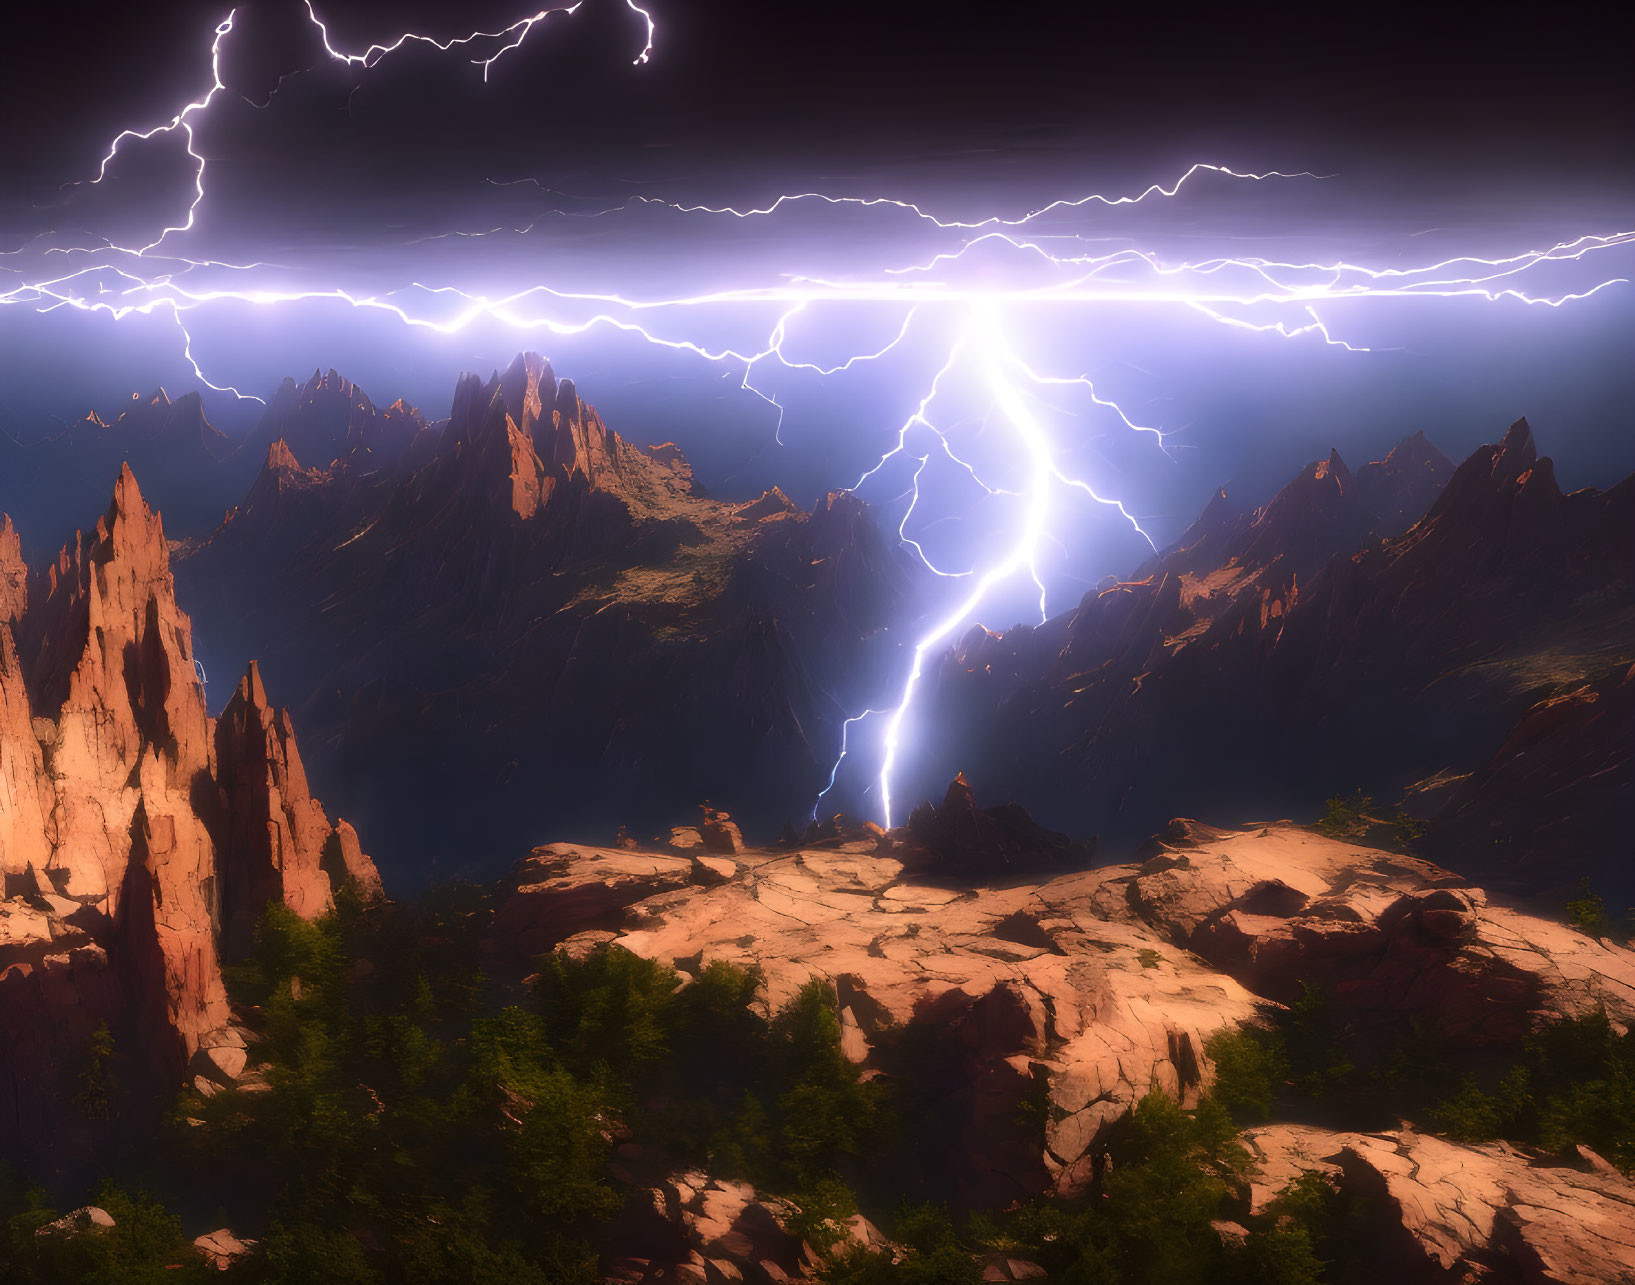 Dramatic lightning bolt in night sky over rugged mountains